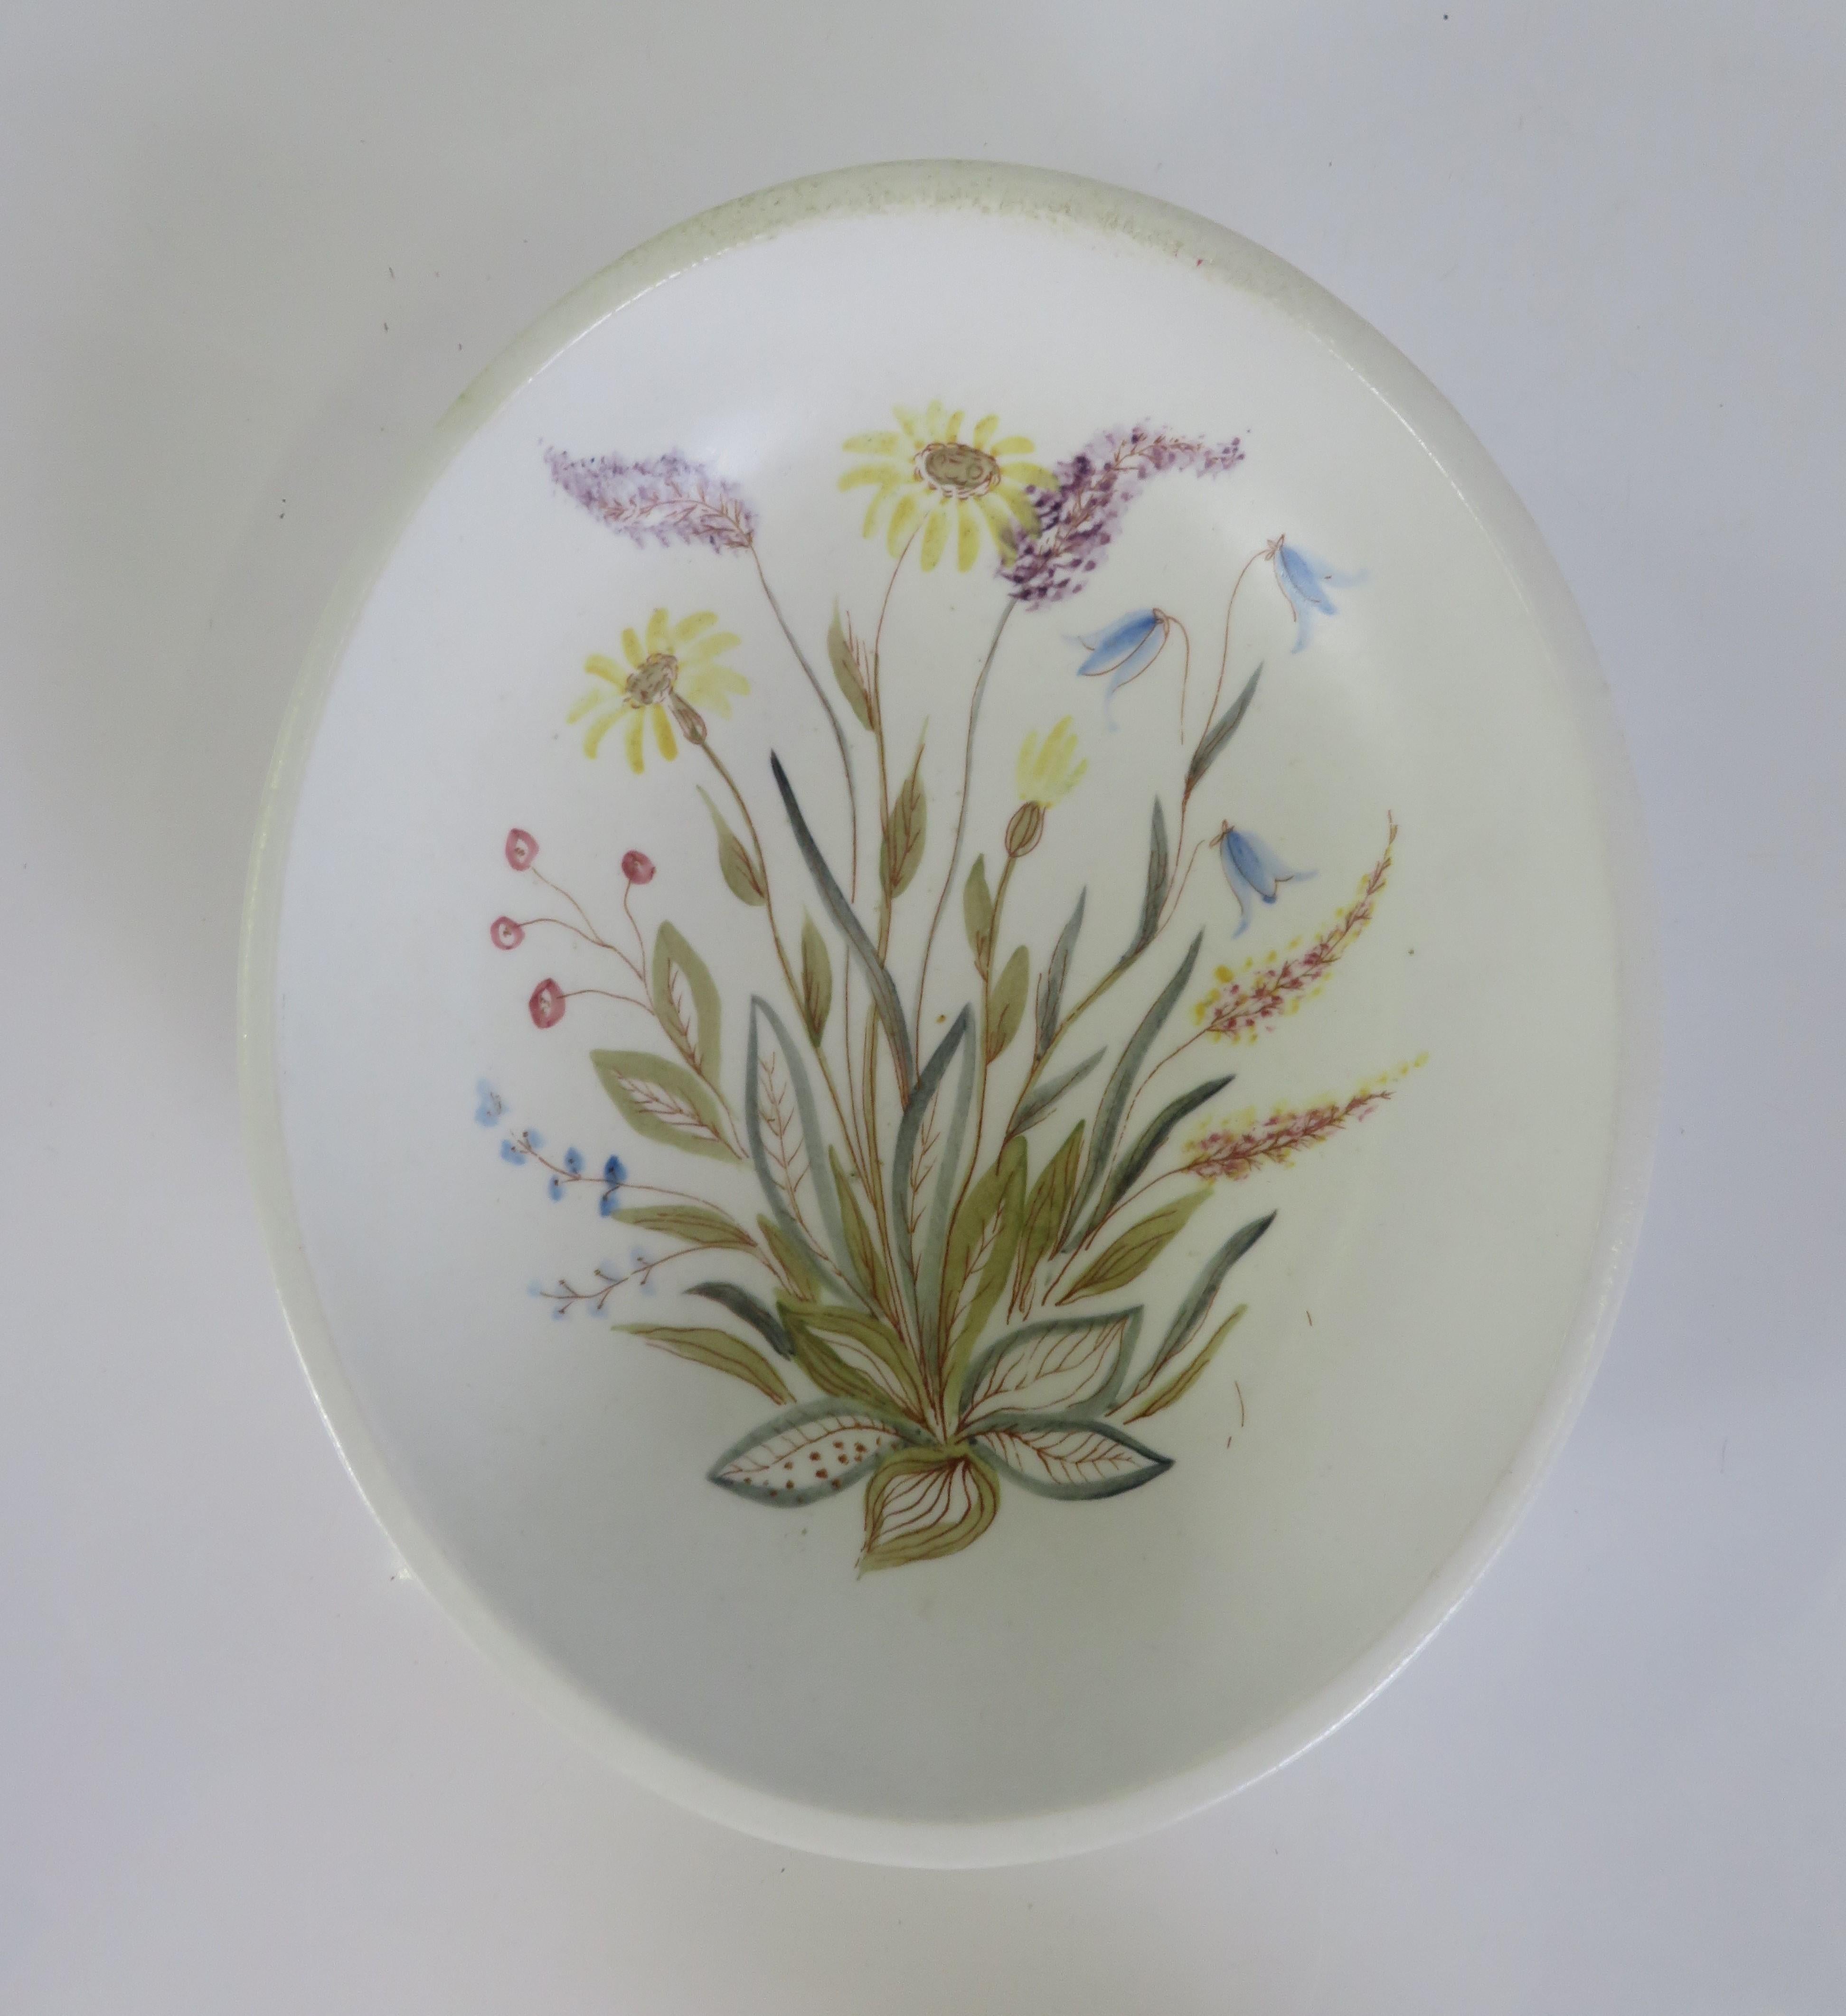 In the 1940s, Lars Thoren (1918-2006) created a collection of white stoneware pieces for Rorstrand named “Vilda Blommor” or “Wildflowers”. The pieces had hand-painted decor of colorful flowers that grew in the meadows of Sweden like heather,